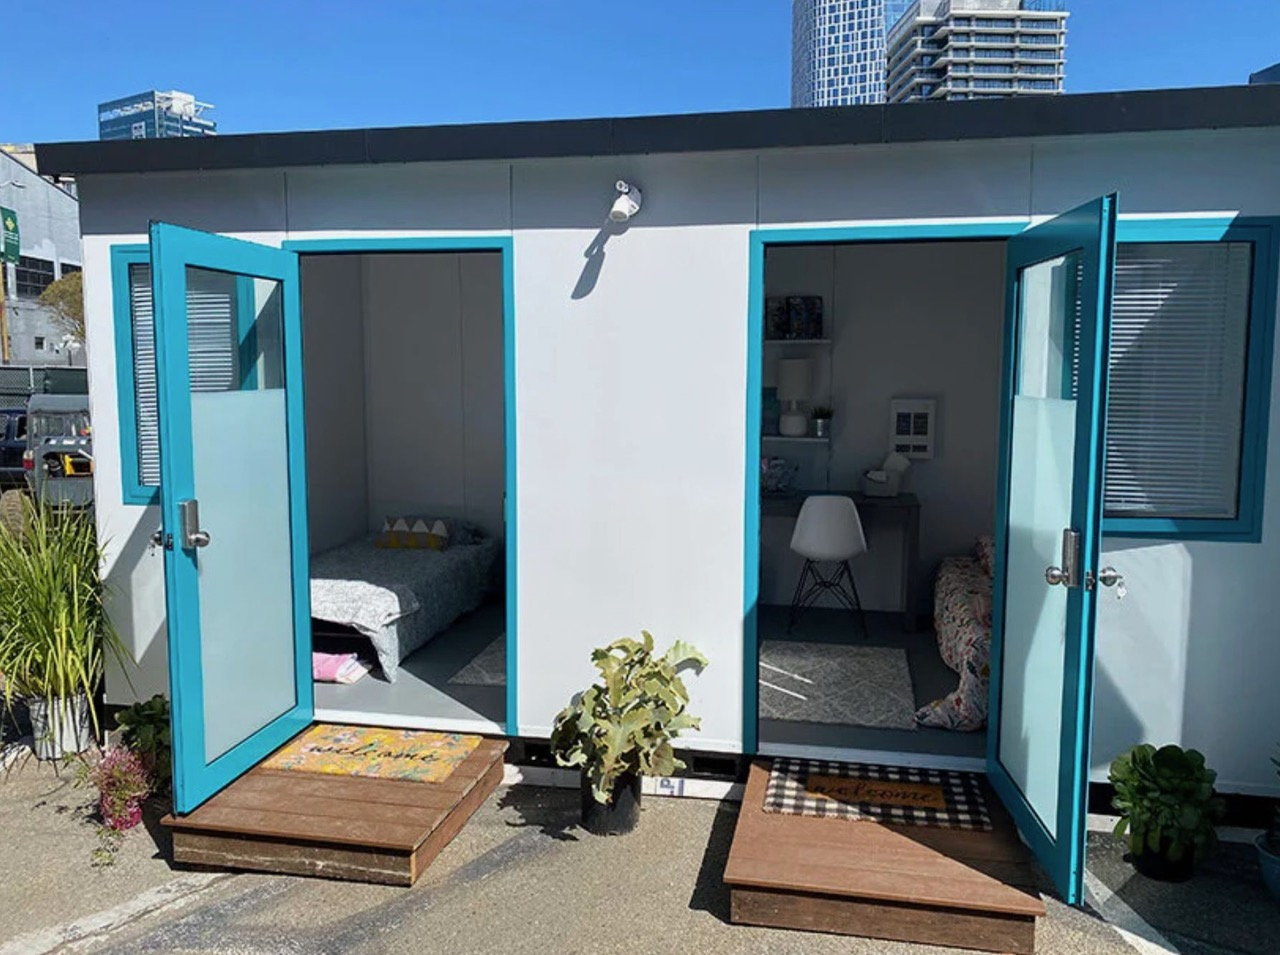 View into the cozy rooms at DignityMoves' new San Francisco tiny home community for the homeless.